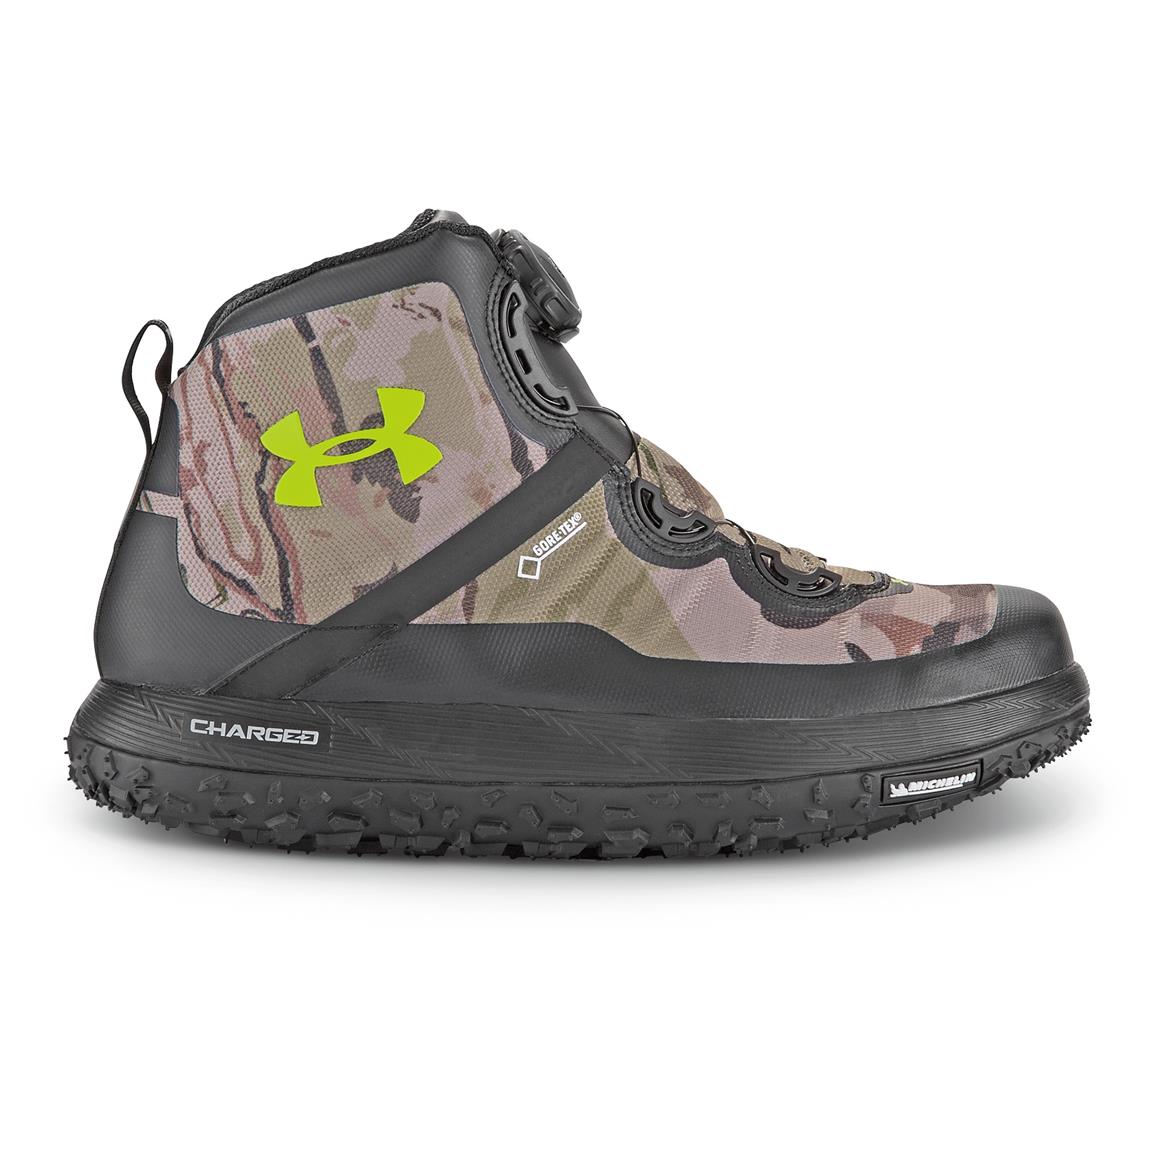 Under Armour Men's Fat Tire GORE-TEX Waterproof Boots - 656096, Hiking ...